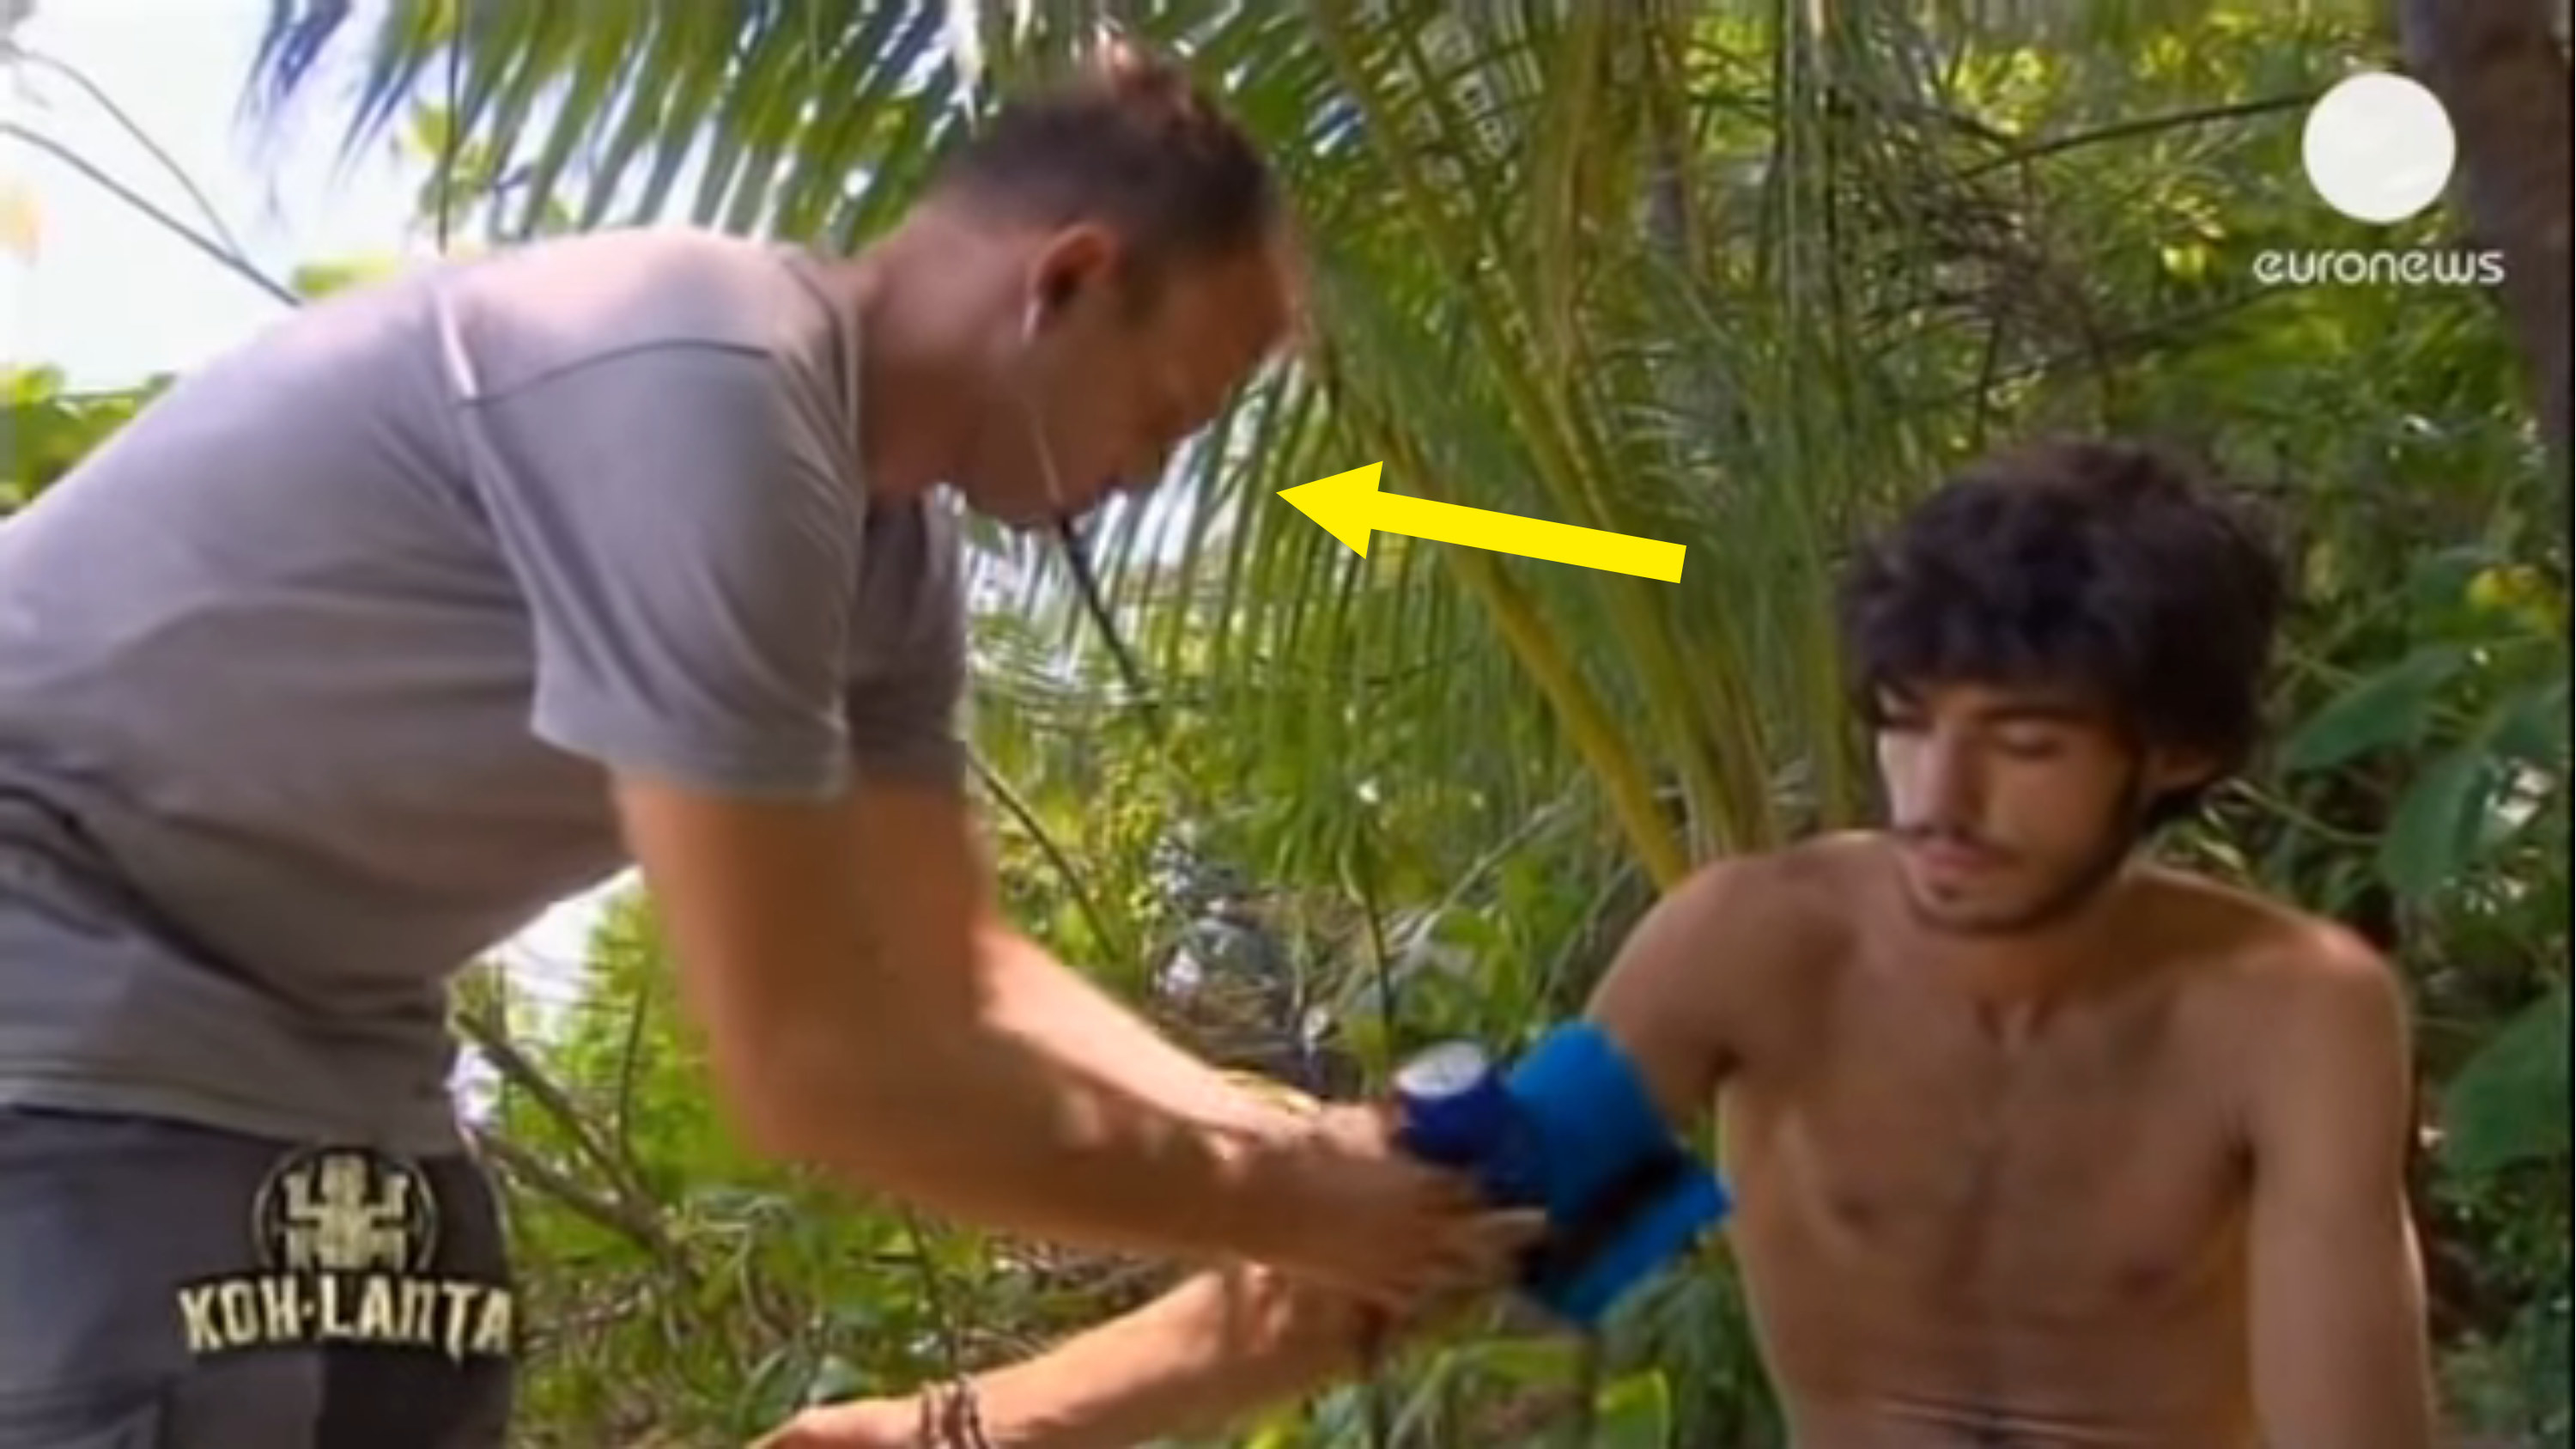 Costa checking the blood pressure on a contestant